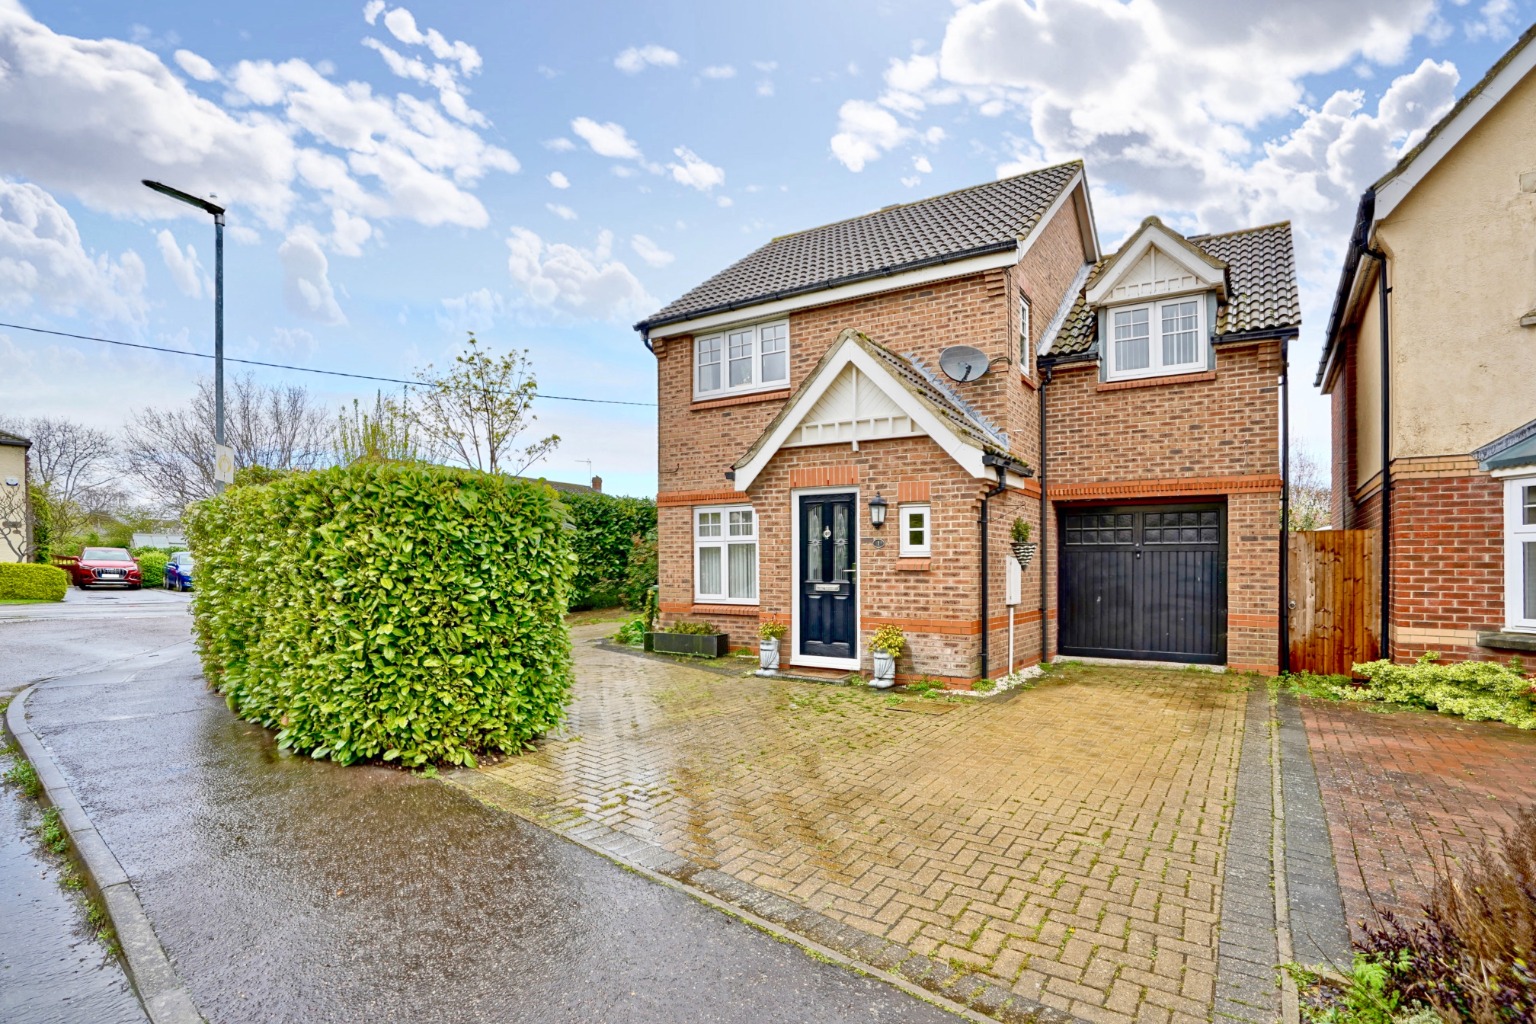 3 bed detached house for sale in Sumerling Way, Huntingdon - Property Image 1